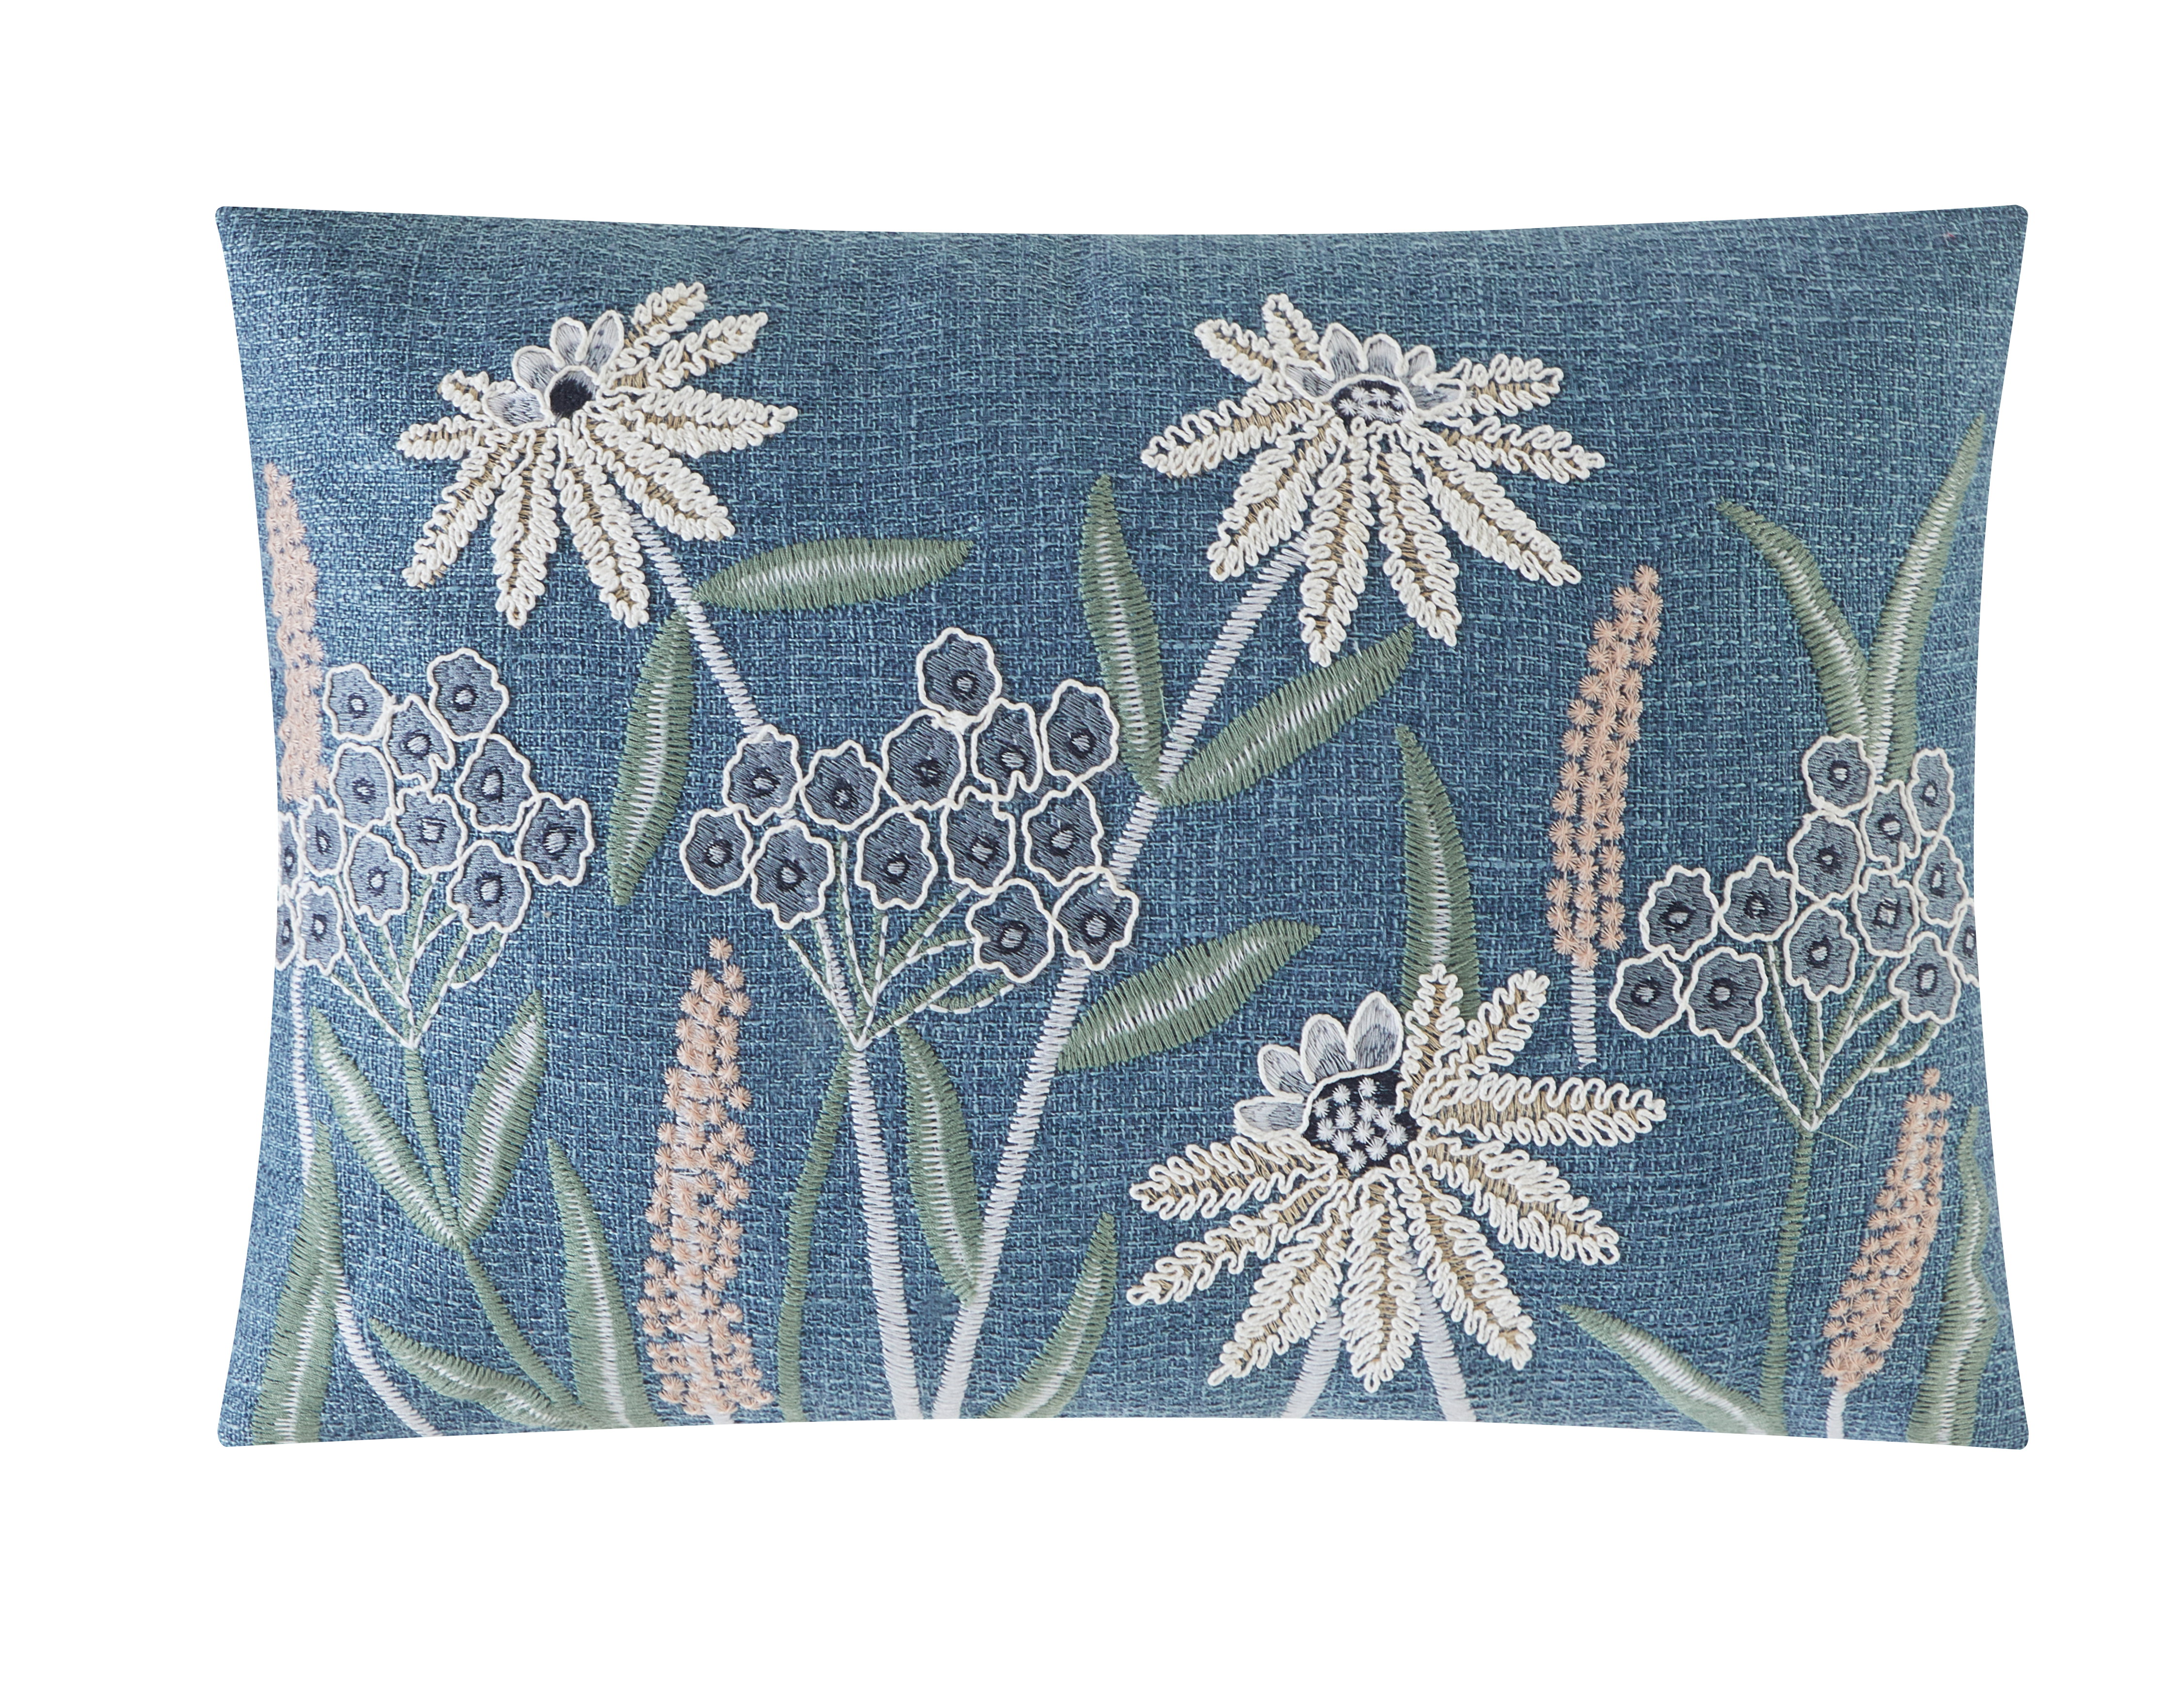 Mainstays Chambray Embroidered Botanical Decorative Pillow 14" x 20" - image 1 of 7